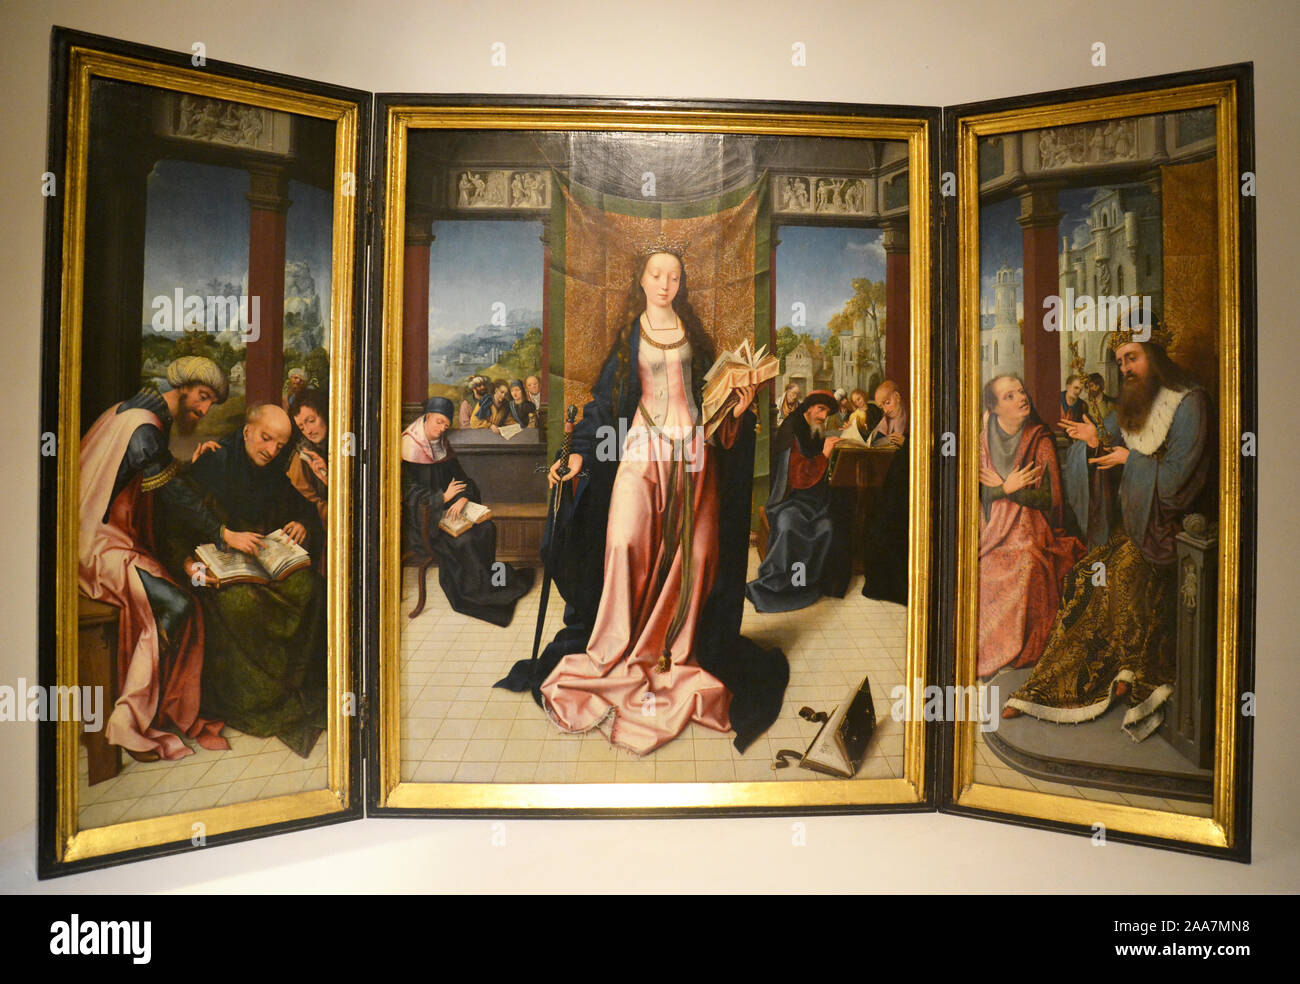 St Catherine and the Philosophers, by Gossen van der Weyden at Southampton City Art Gallery, Southampton, Hampshire, UK. 15th/16th century paintings. Stock Photo